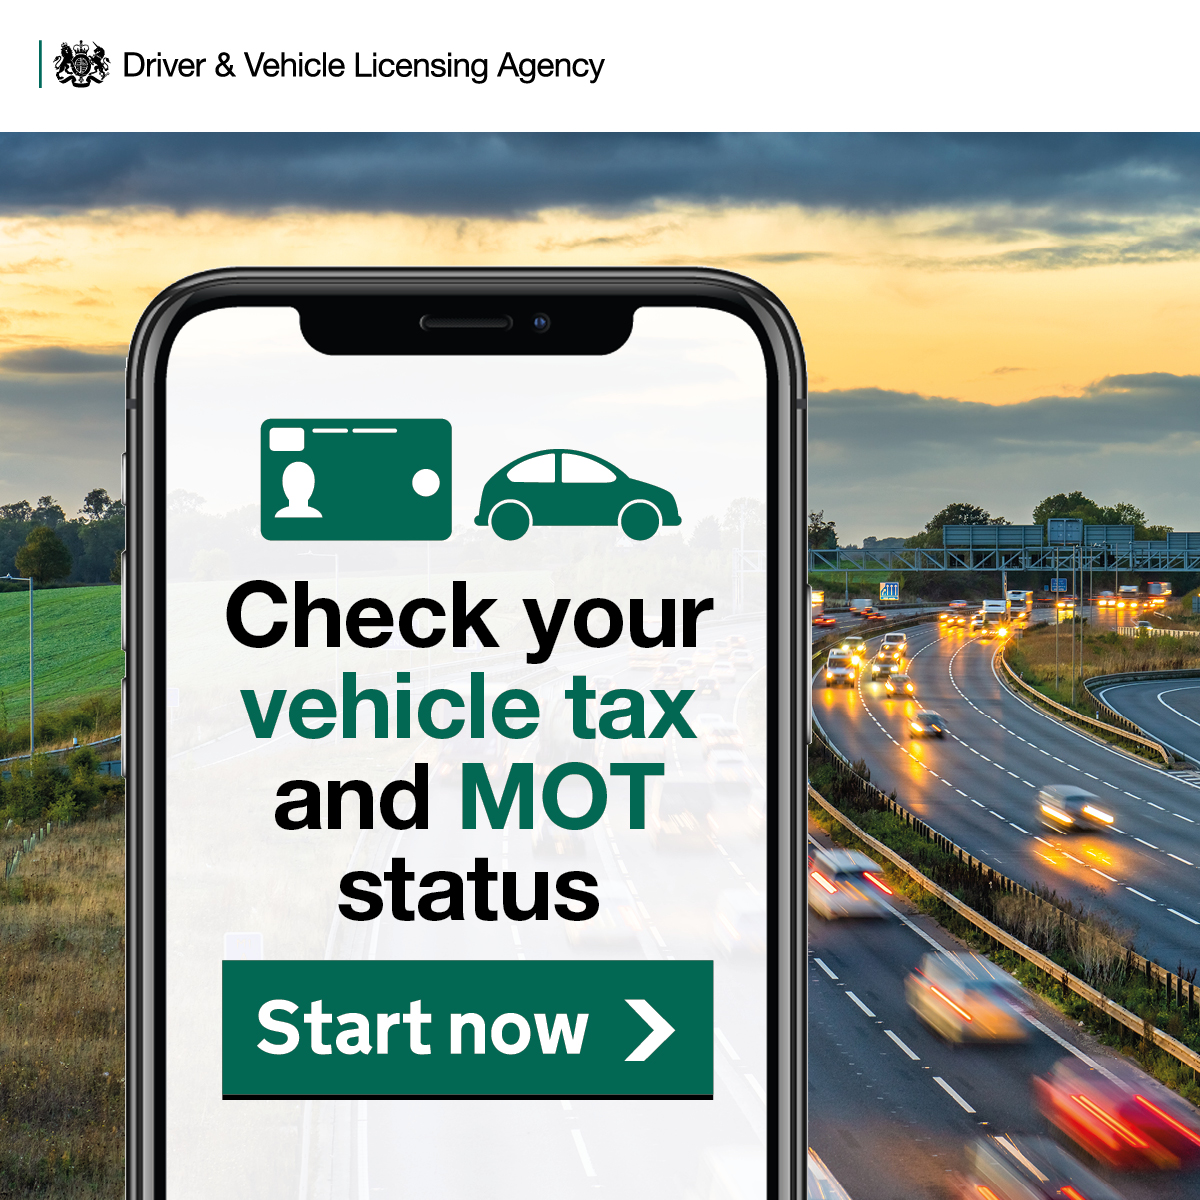 Check your vehicle tax and MOT status! Set up your Driver and vehicles account on GOV.UK today. It’s free, quick and secure: gov.uk/dvla/account